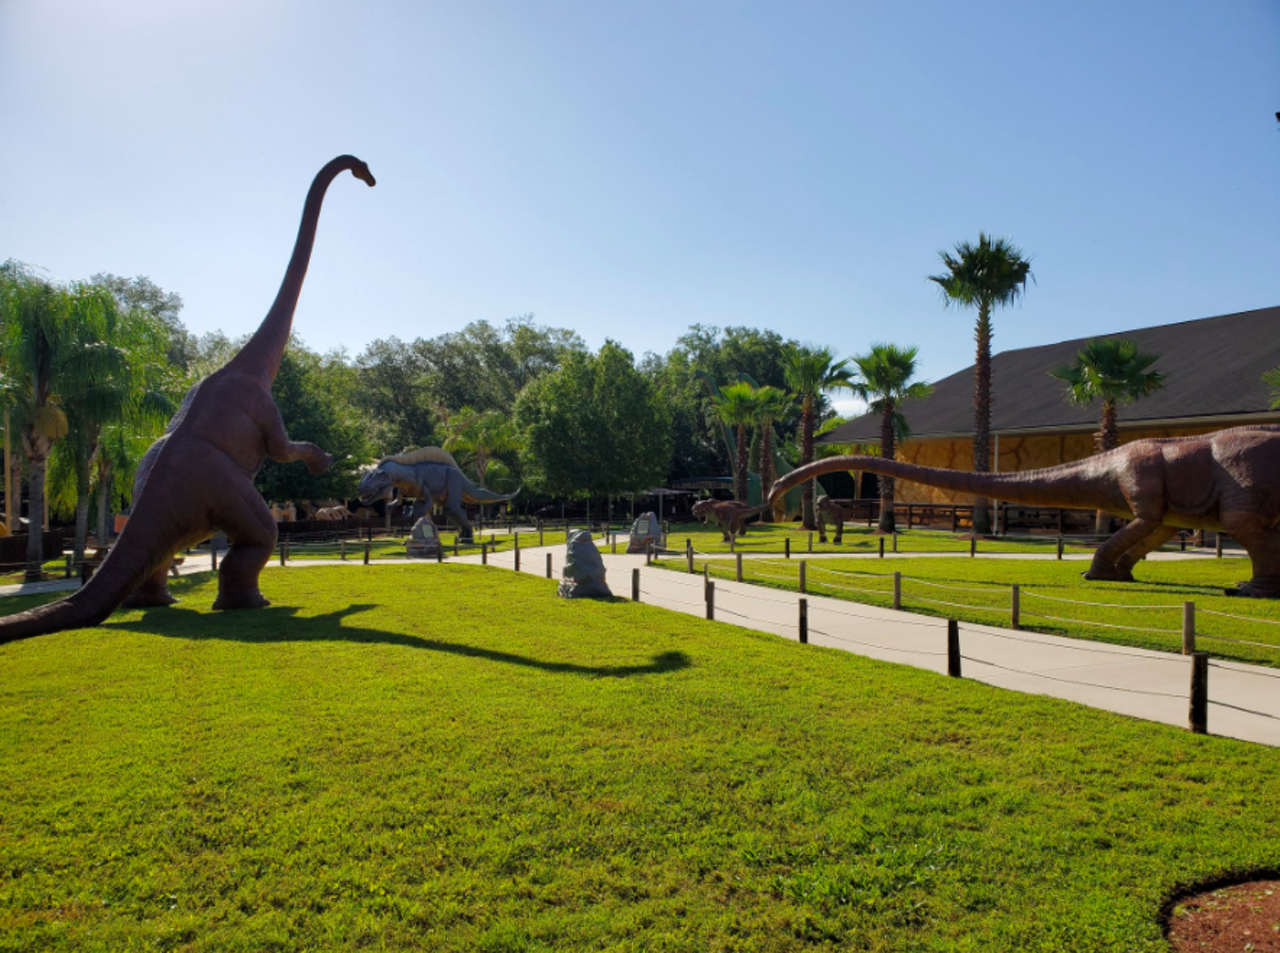  Dinosaur World 
5145 Harvey Tew Rd., Plant City, (813) 717-9865
Whether for the kids or the prehistoric-loving adults, a trip to the part outside, part indoors Dinosaur World can be both fun and educational. Visitors can walk alongside life-sized dinosaurs or participate in an interactive dinosaur exhibit.
Photos via Dinosaur World, Florida/Facebook